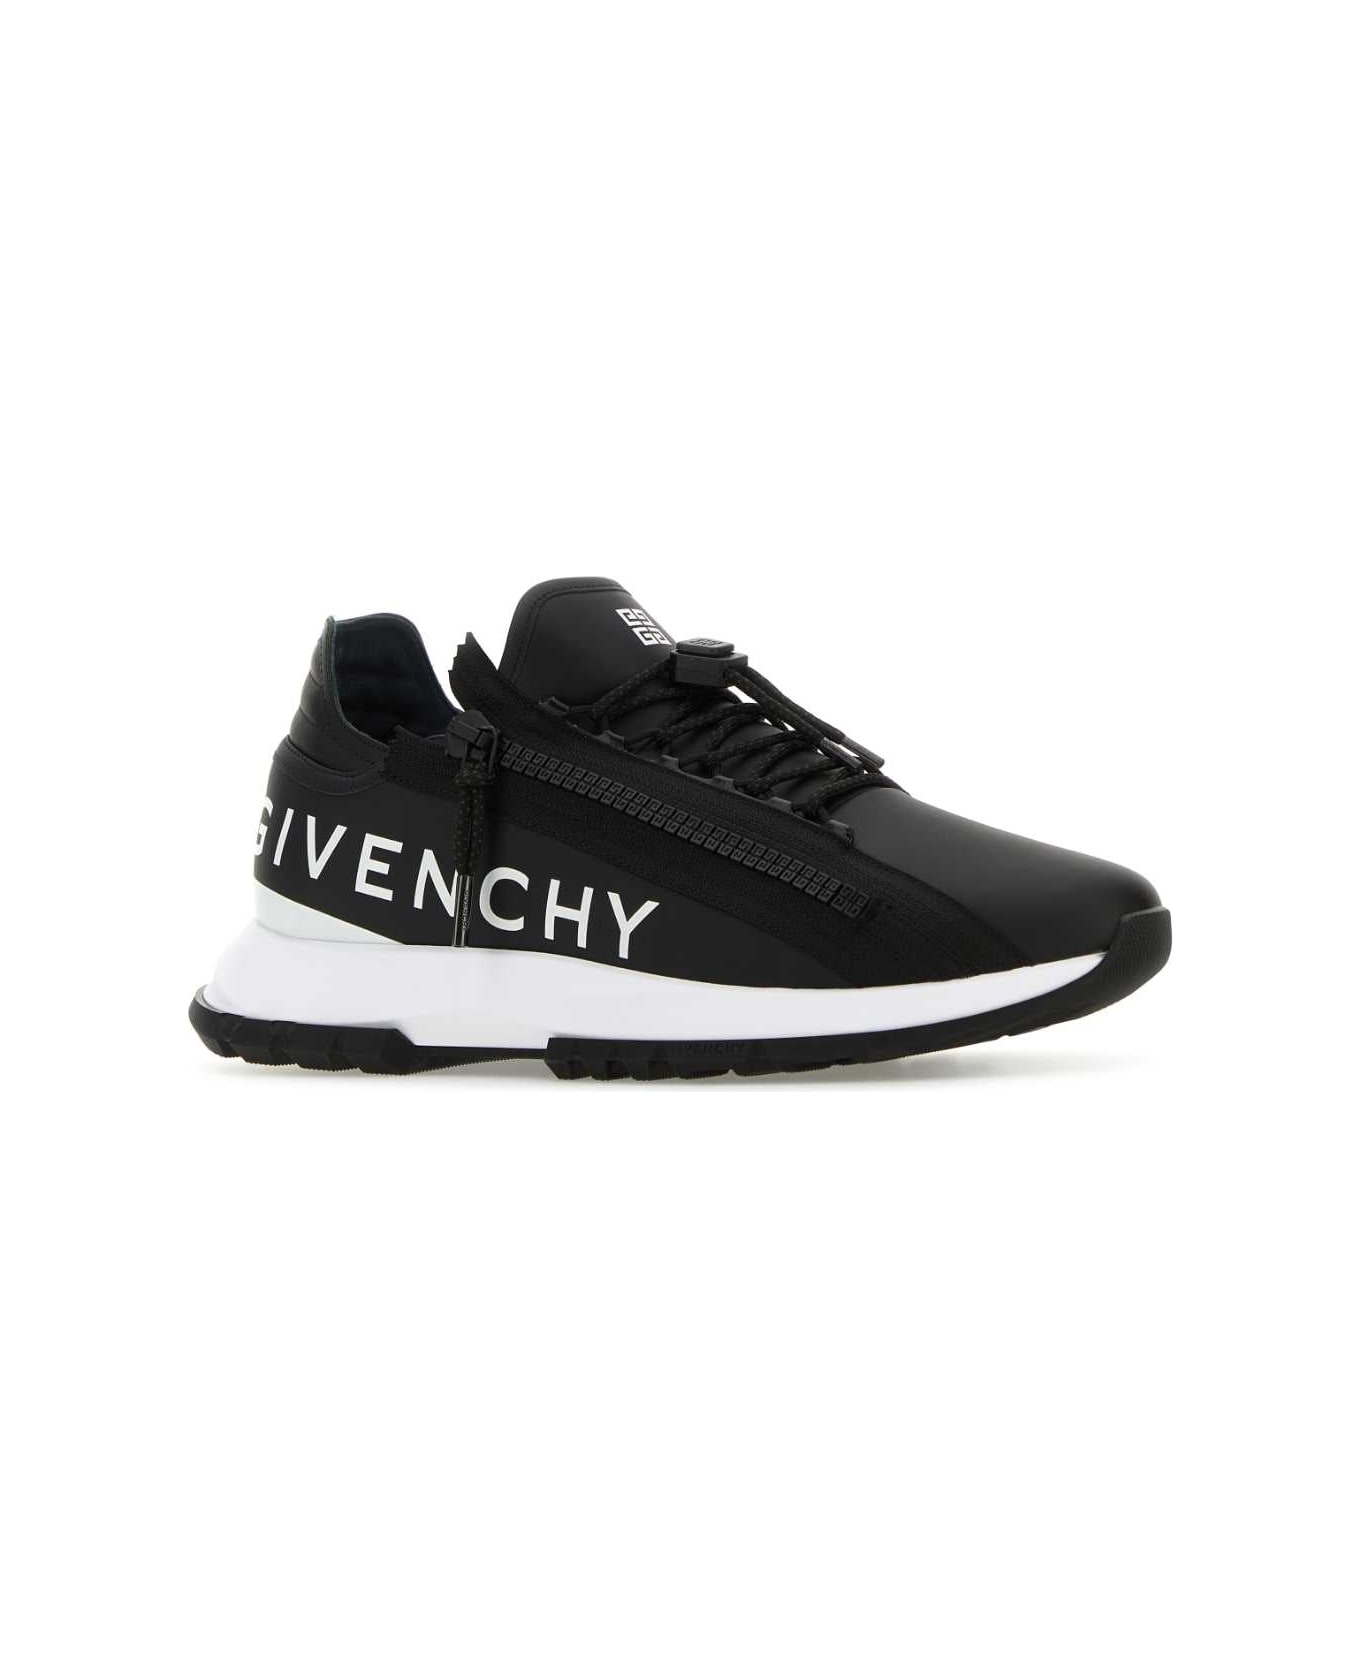 Givenchy Black Leather Spectre Sneakers - BLACKWHITE スニーカー